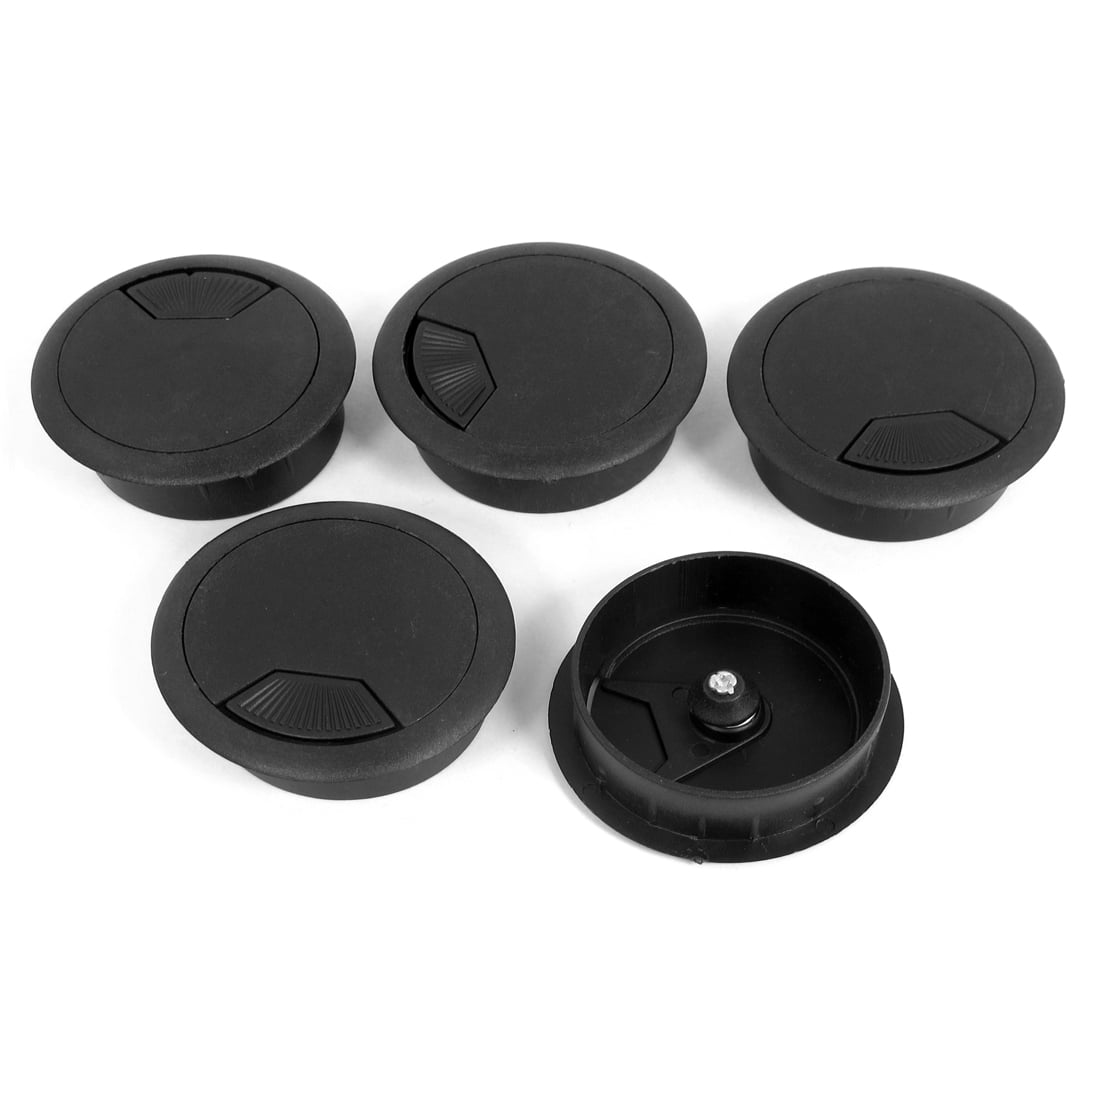 35 mm/ 1.38 Inch Mounting Hole Diamete PC Computer Desk Plastic Grommet Cord Tidy Cable Hole Cover Organizers Yinpecly 30 Pcs Black Desk Cable Wire Grommet Cord 